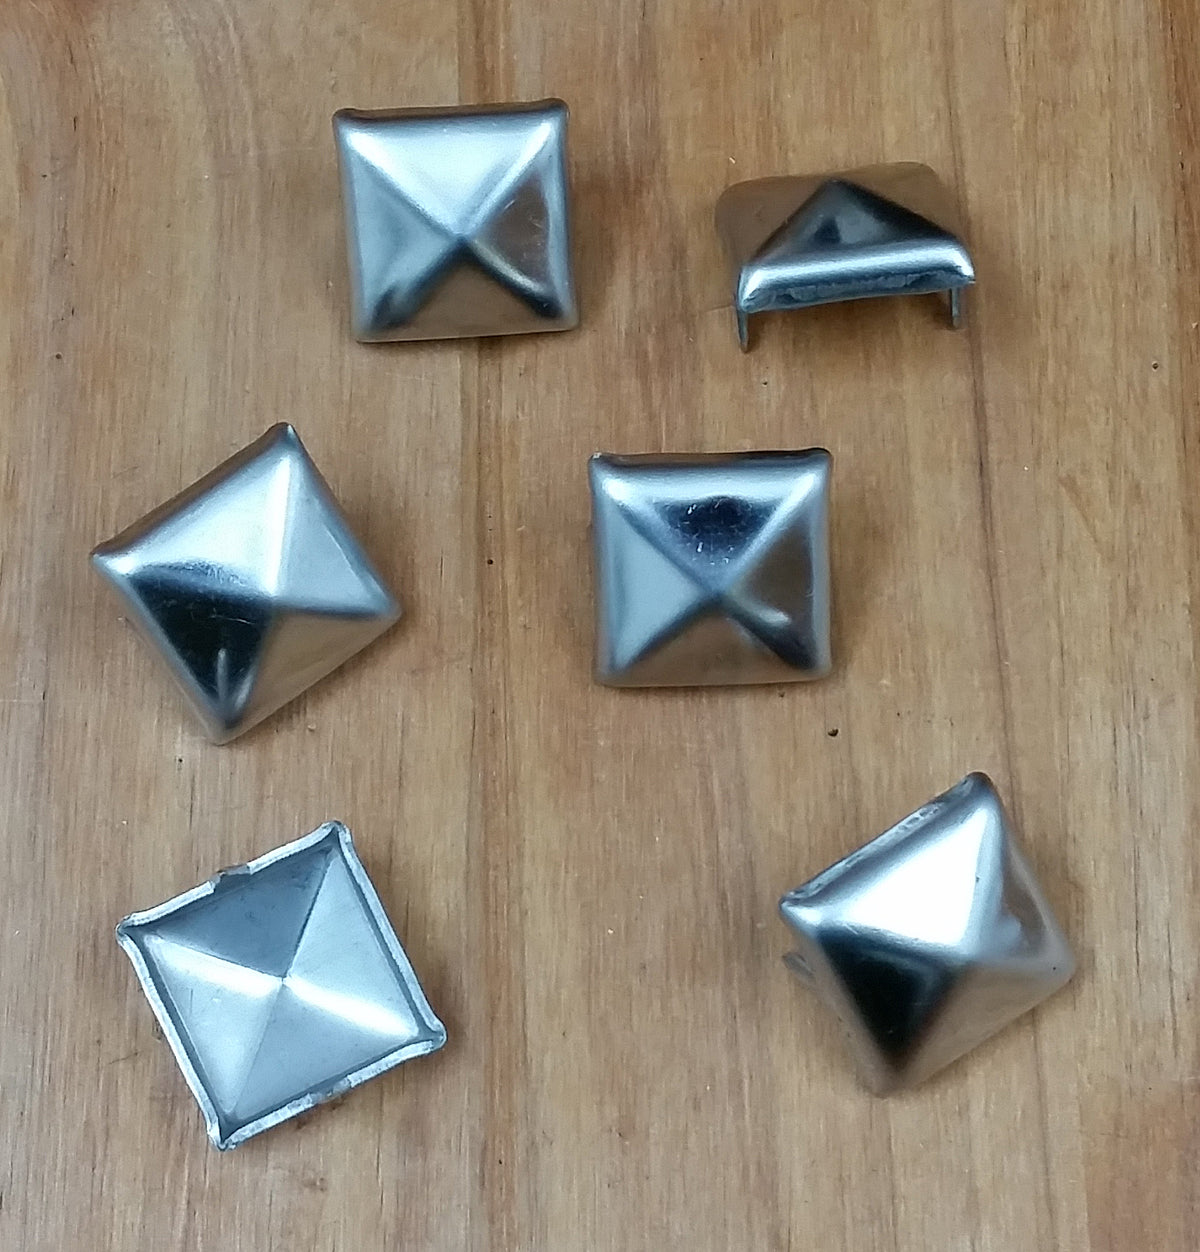 Pyramid Shaped Stainless Steel Nail Cap Clavos - 6 Pack - Wild West Hardware